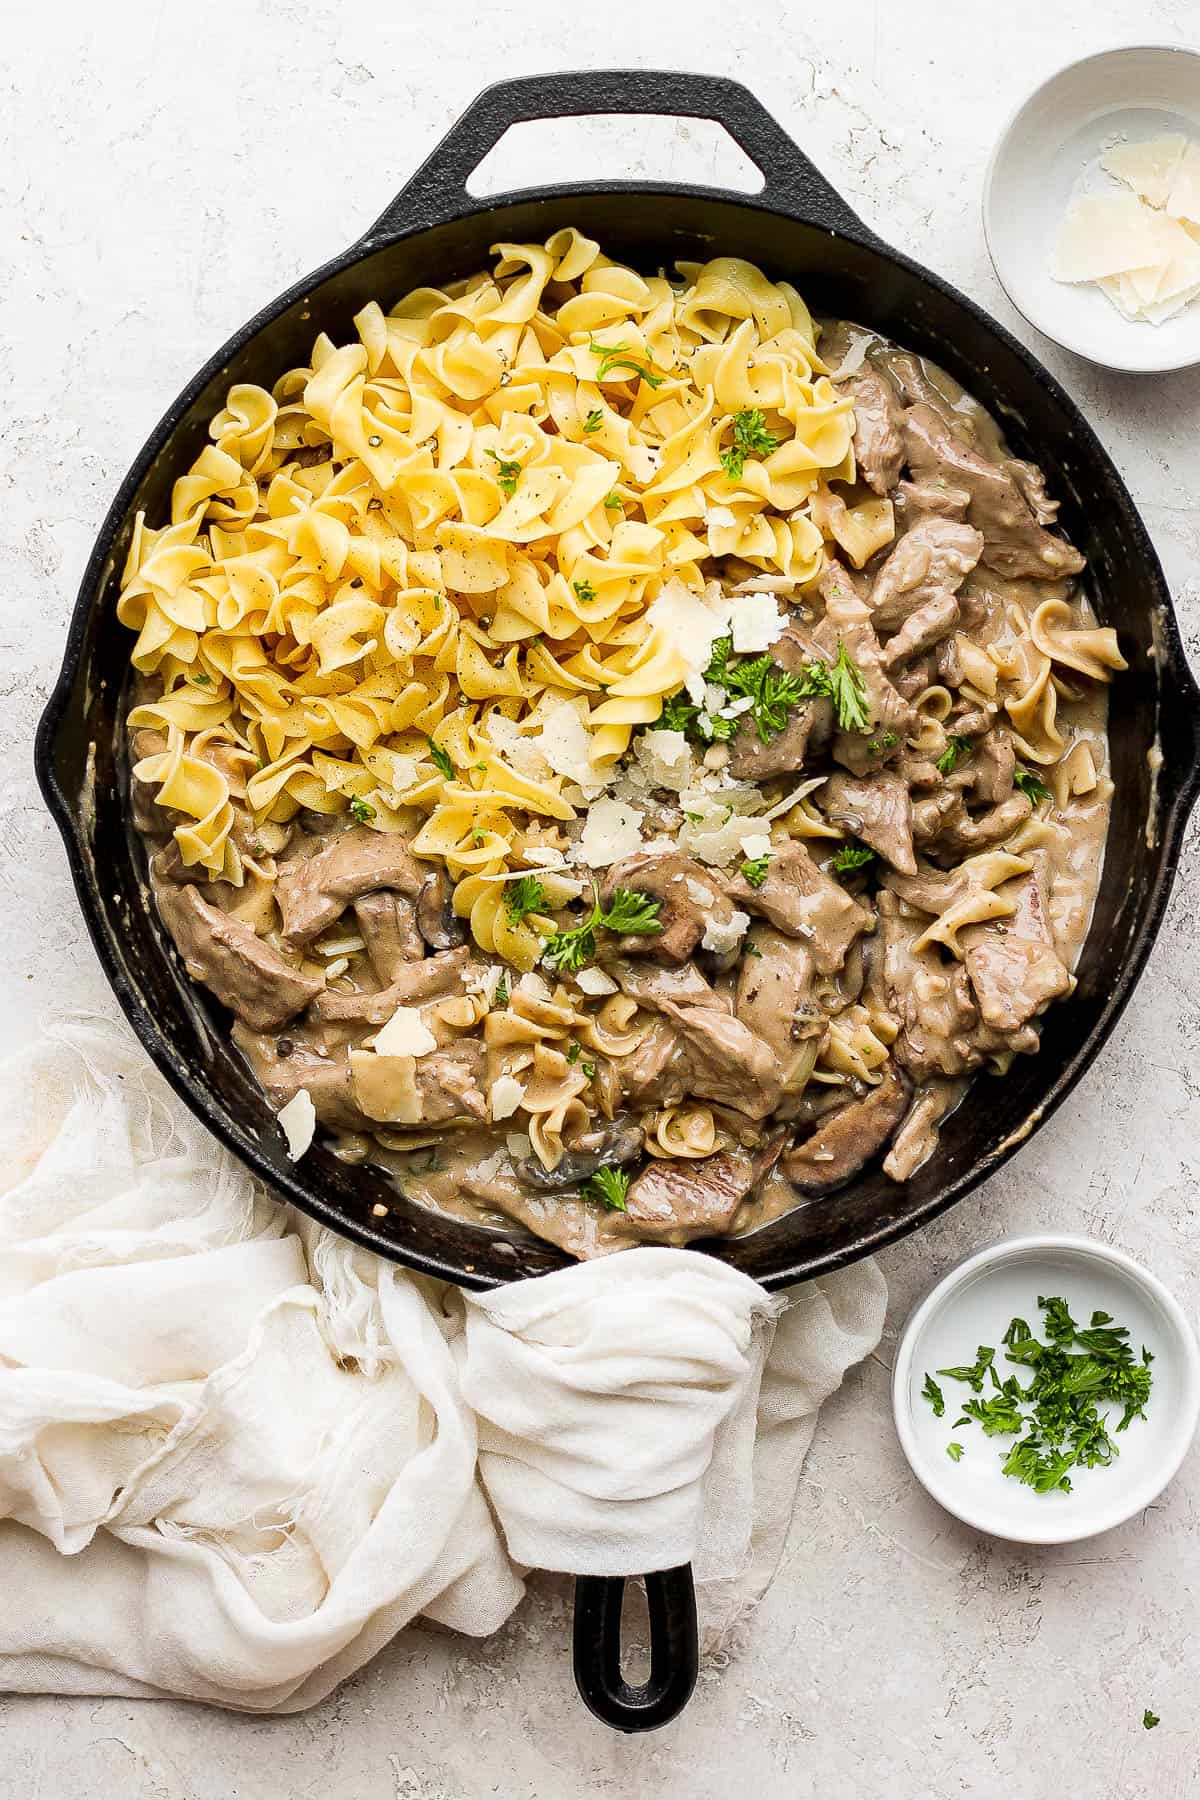 A cast iron skillet with one half filled with cooked egg noddles and the other half filled with cooked beef stroganoff sauce and beef strips, all topped with shaved parmesan and freshly chopped parsley.